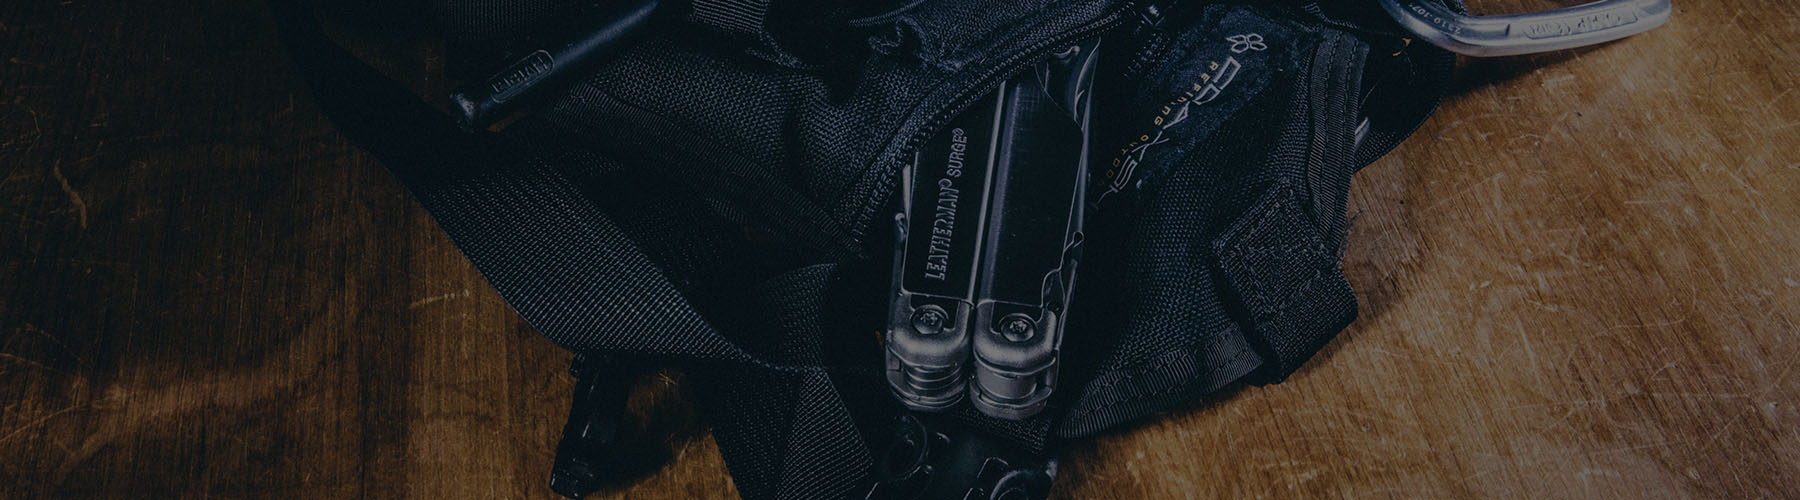 gear with Leatherman tool